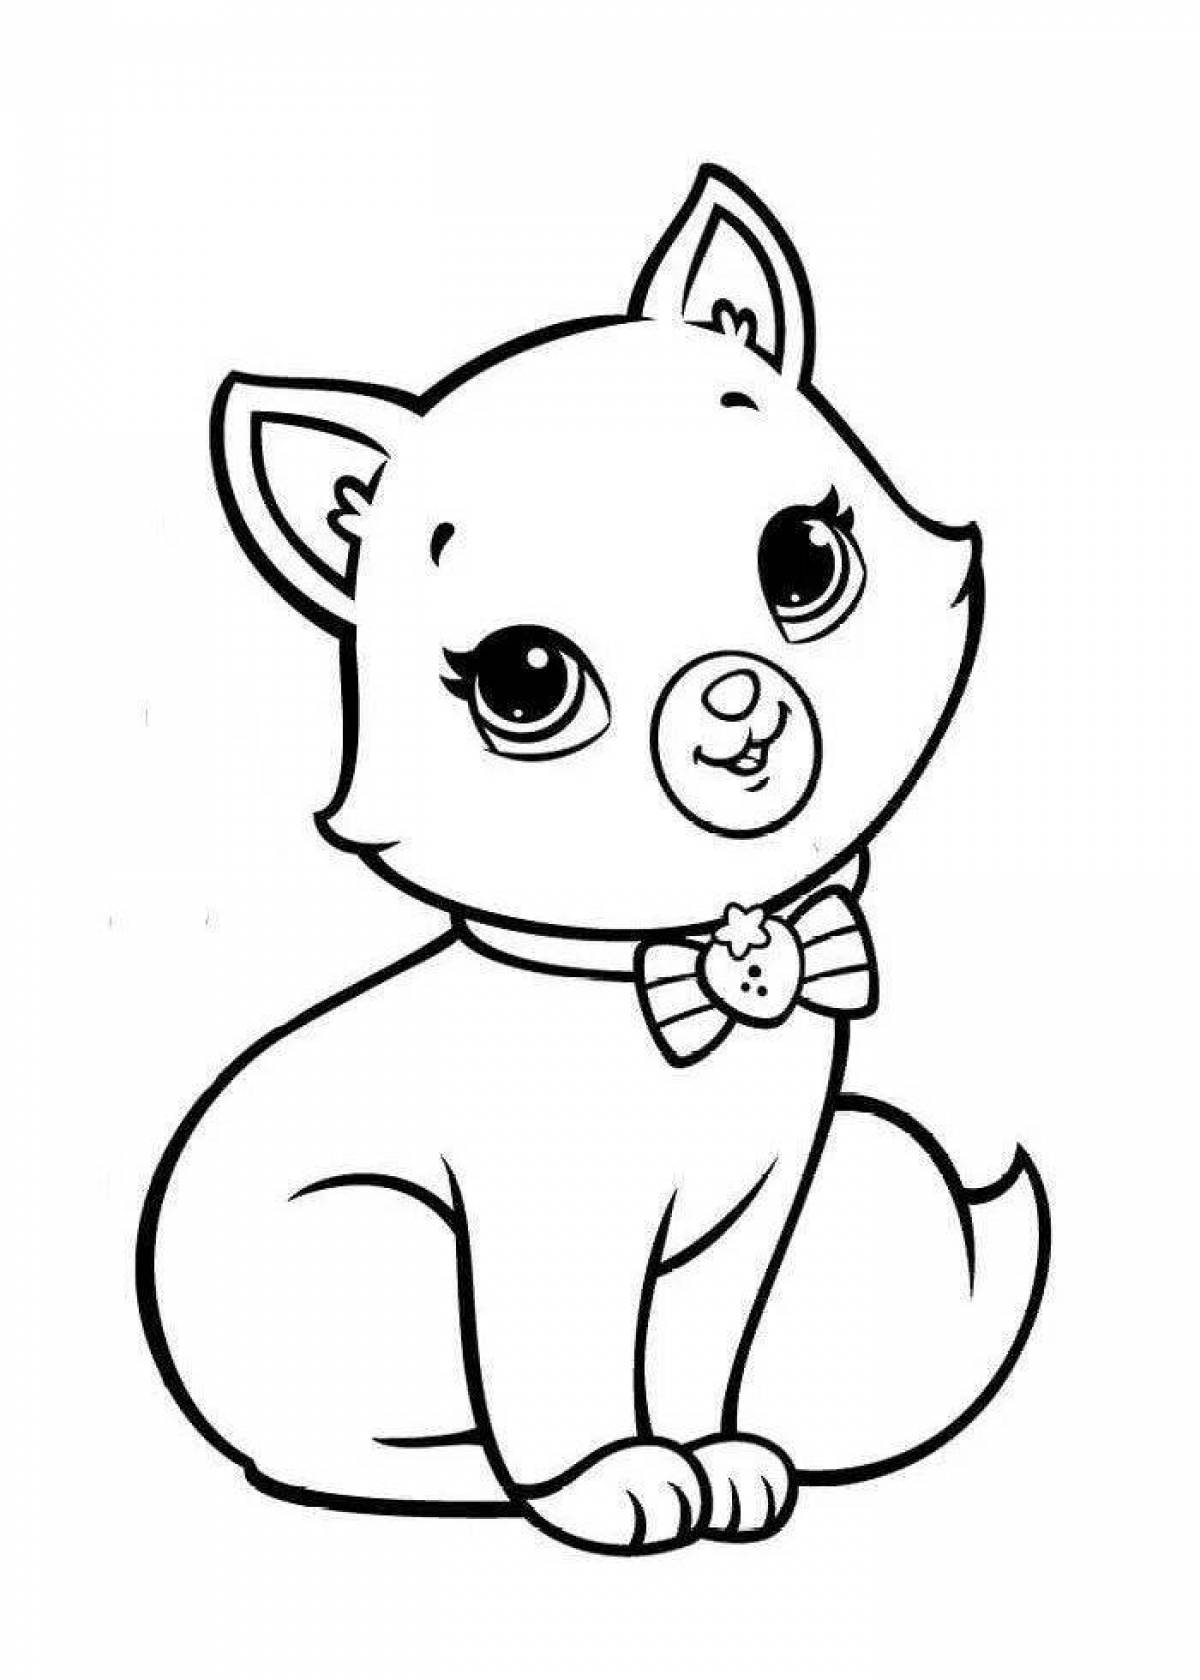 Cute cat coloring book for 4-5 year olds